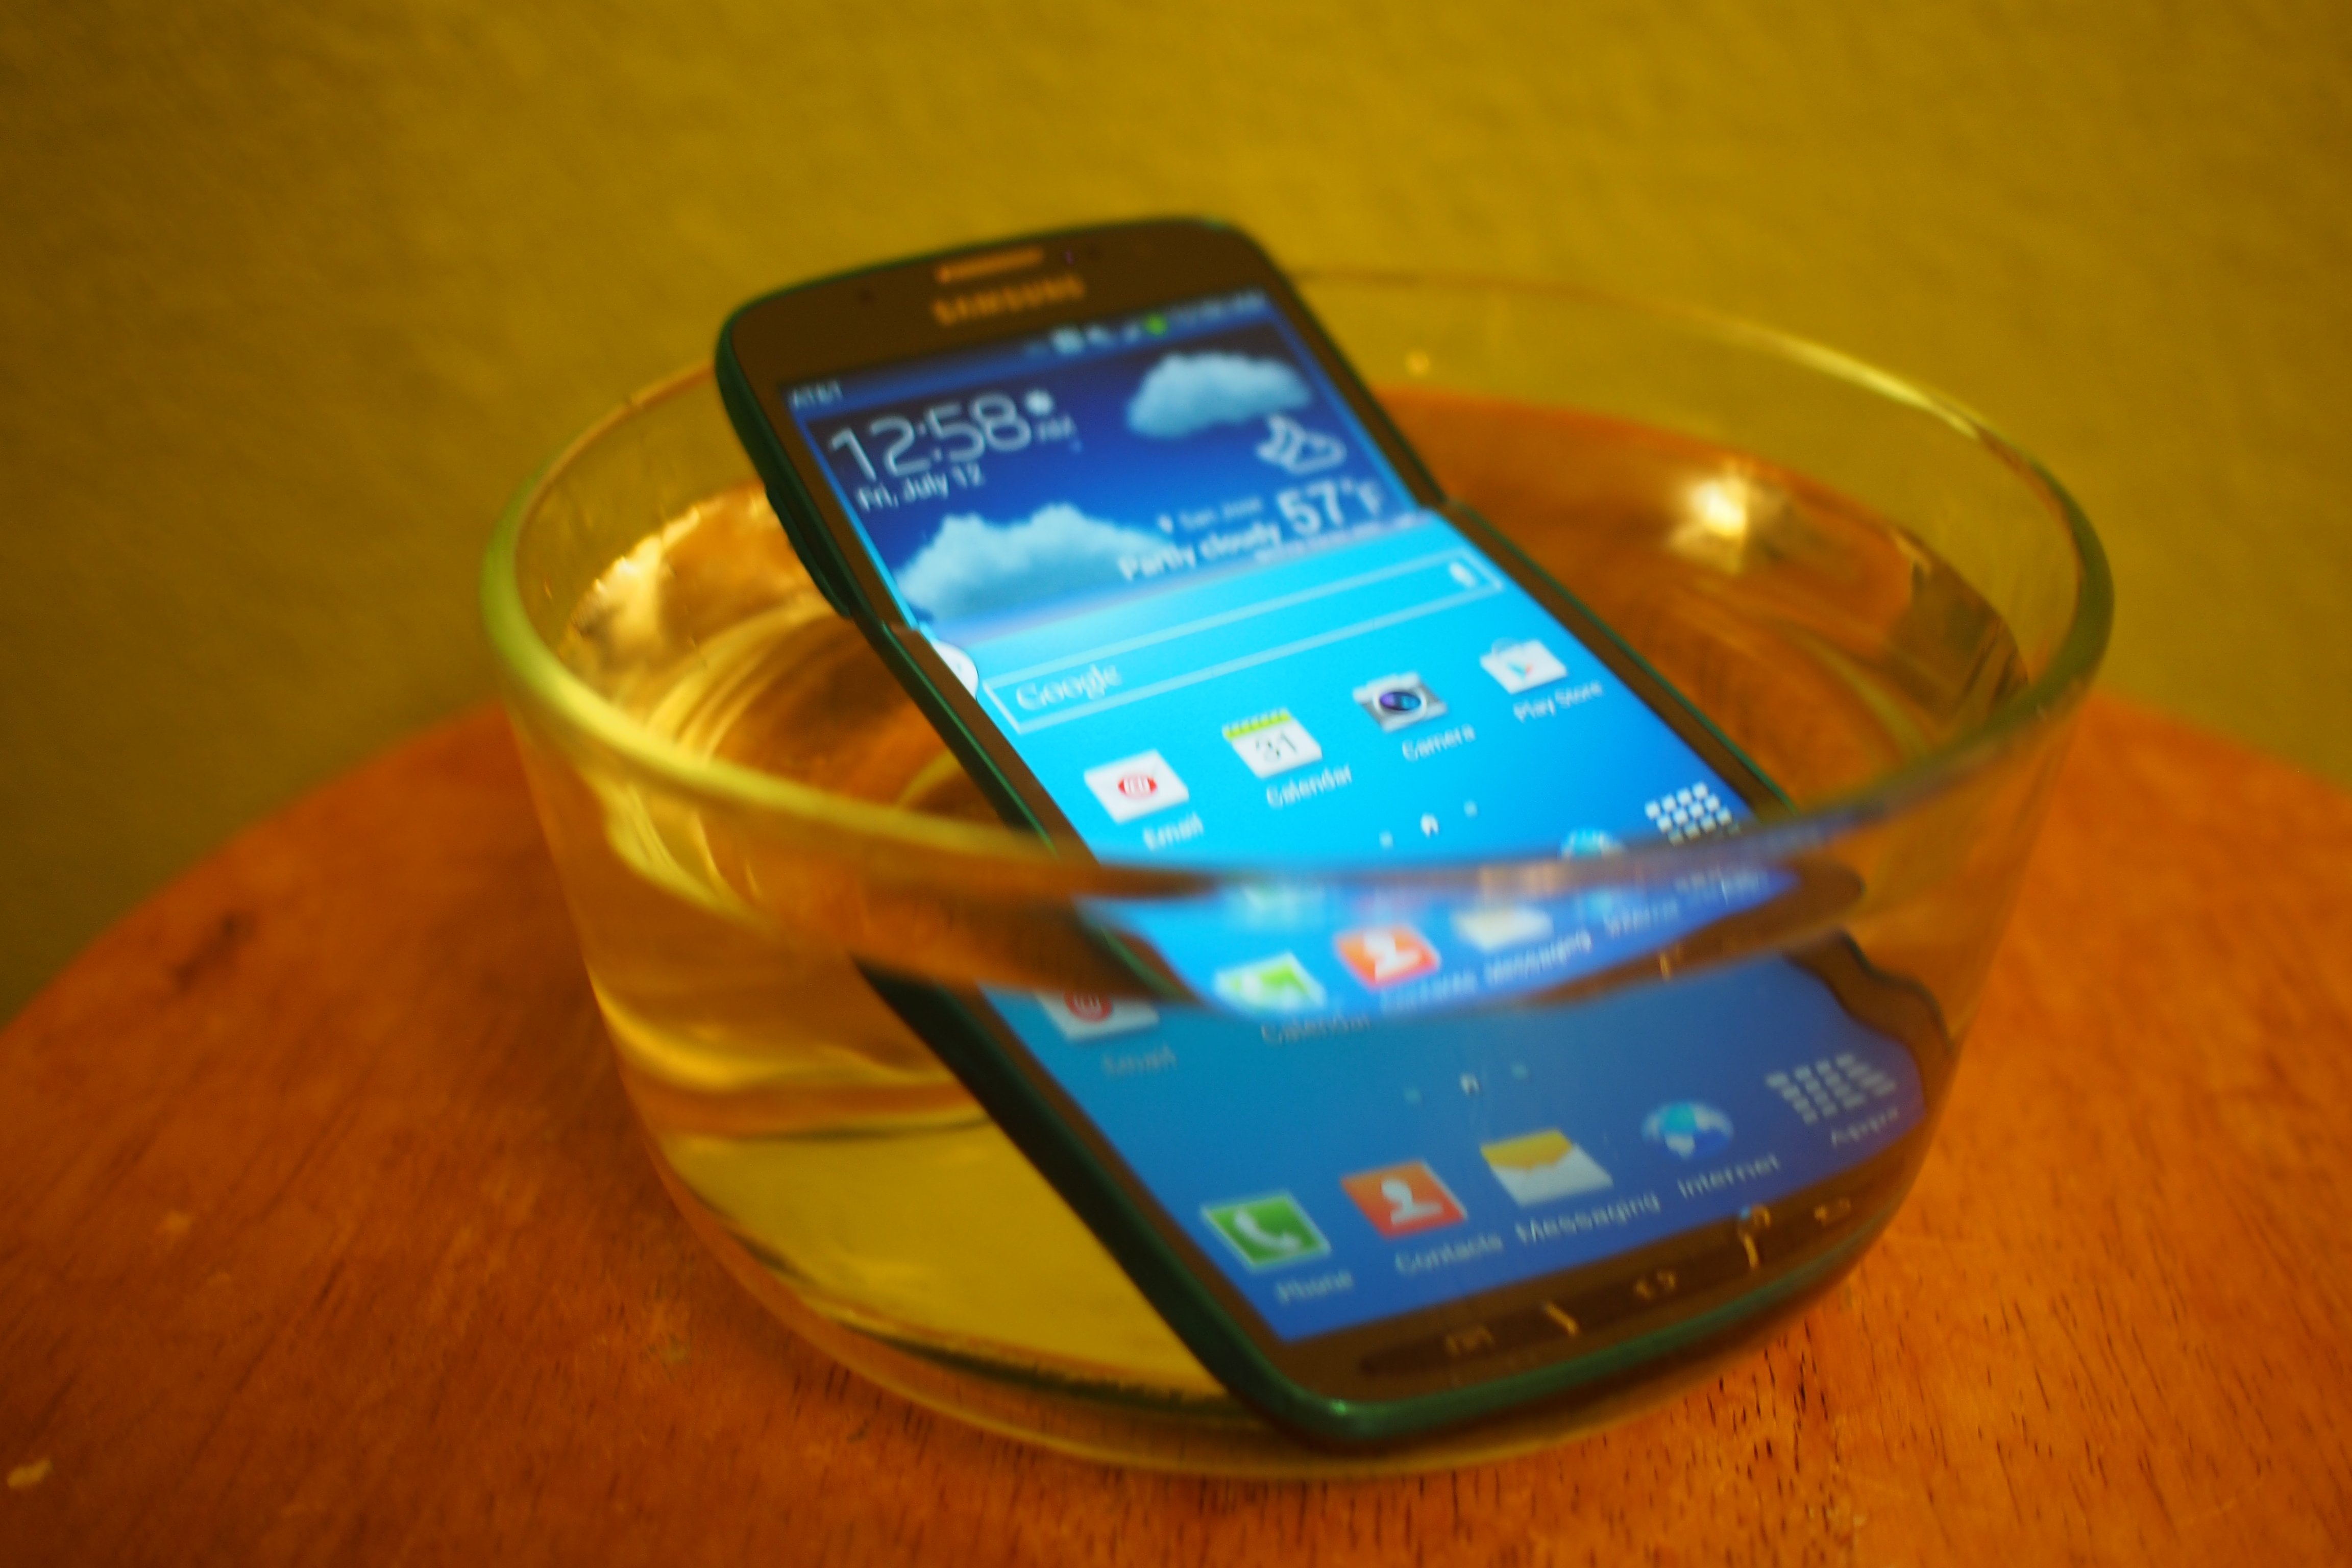 Samsung could be planning a waterproof Galaxy Note 4 as this feature may not make the cut for the Galaxy S5.